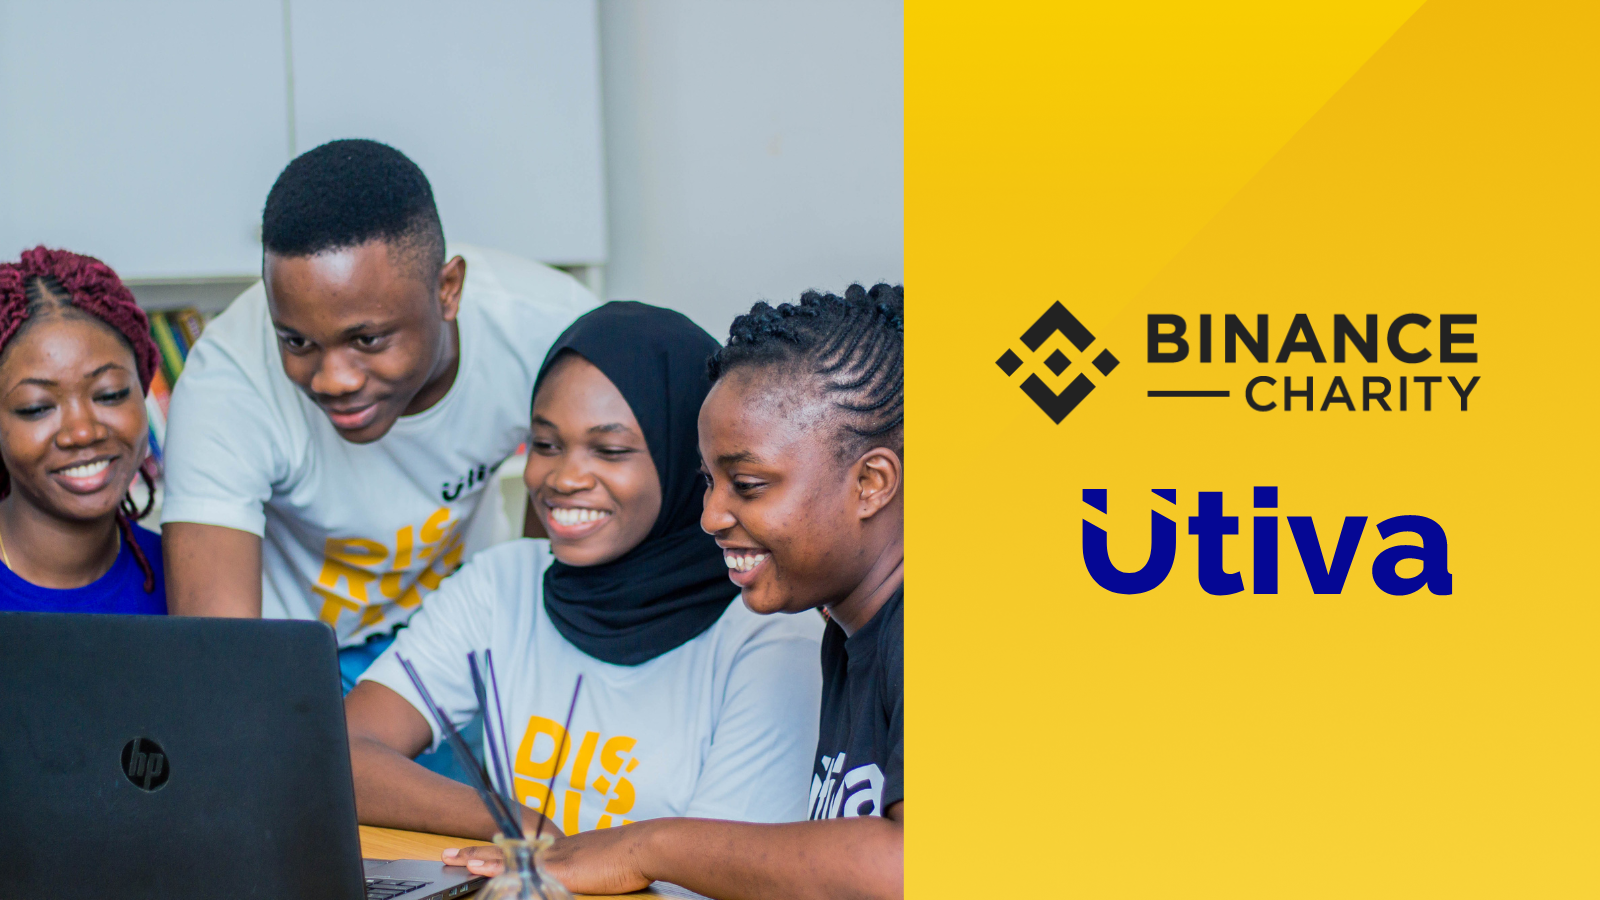 Binance Charity Partners Utiva to give 1000 African Youths Scholarships in Tech Skills Training